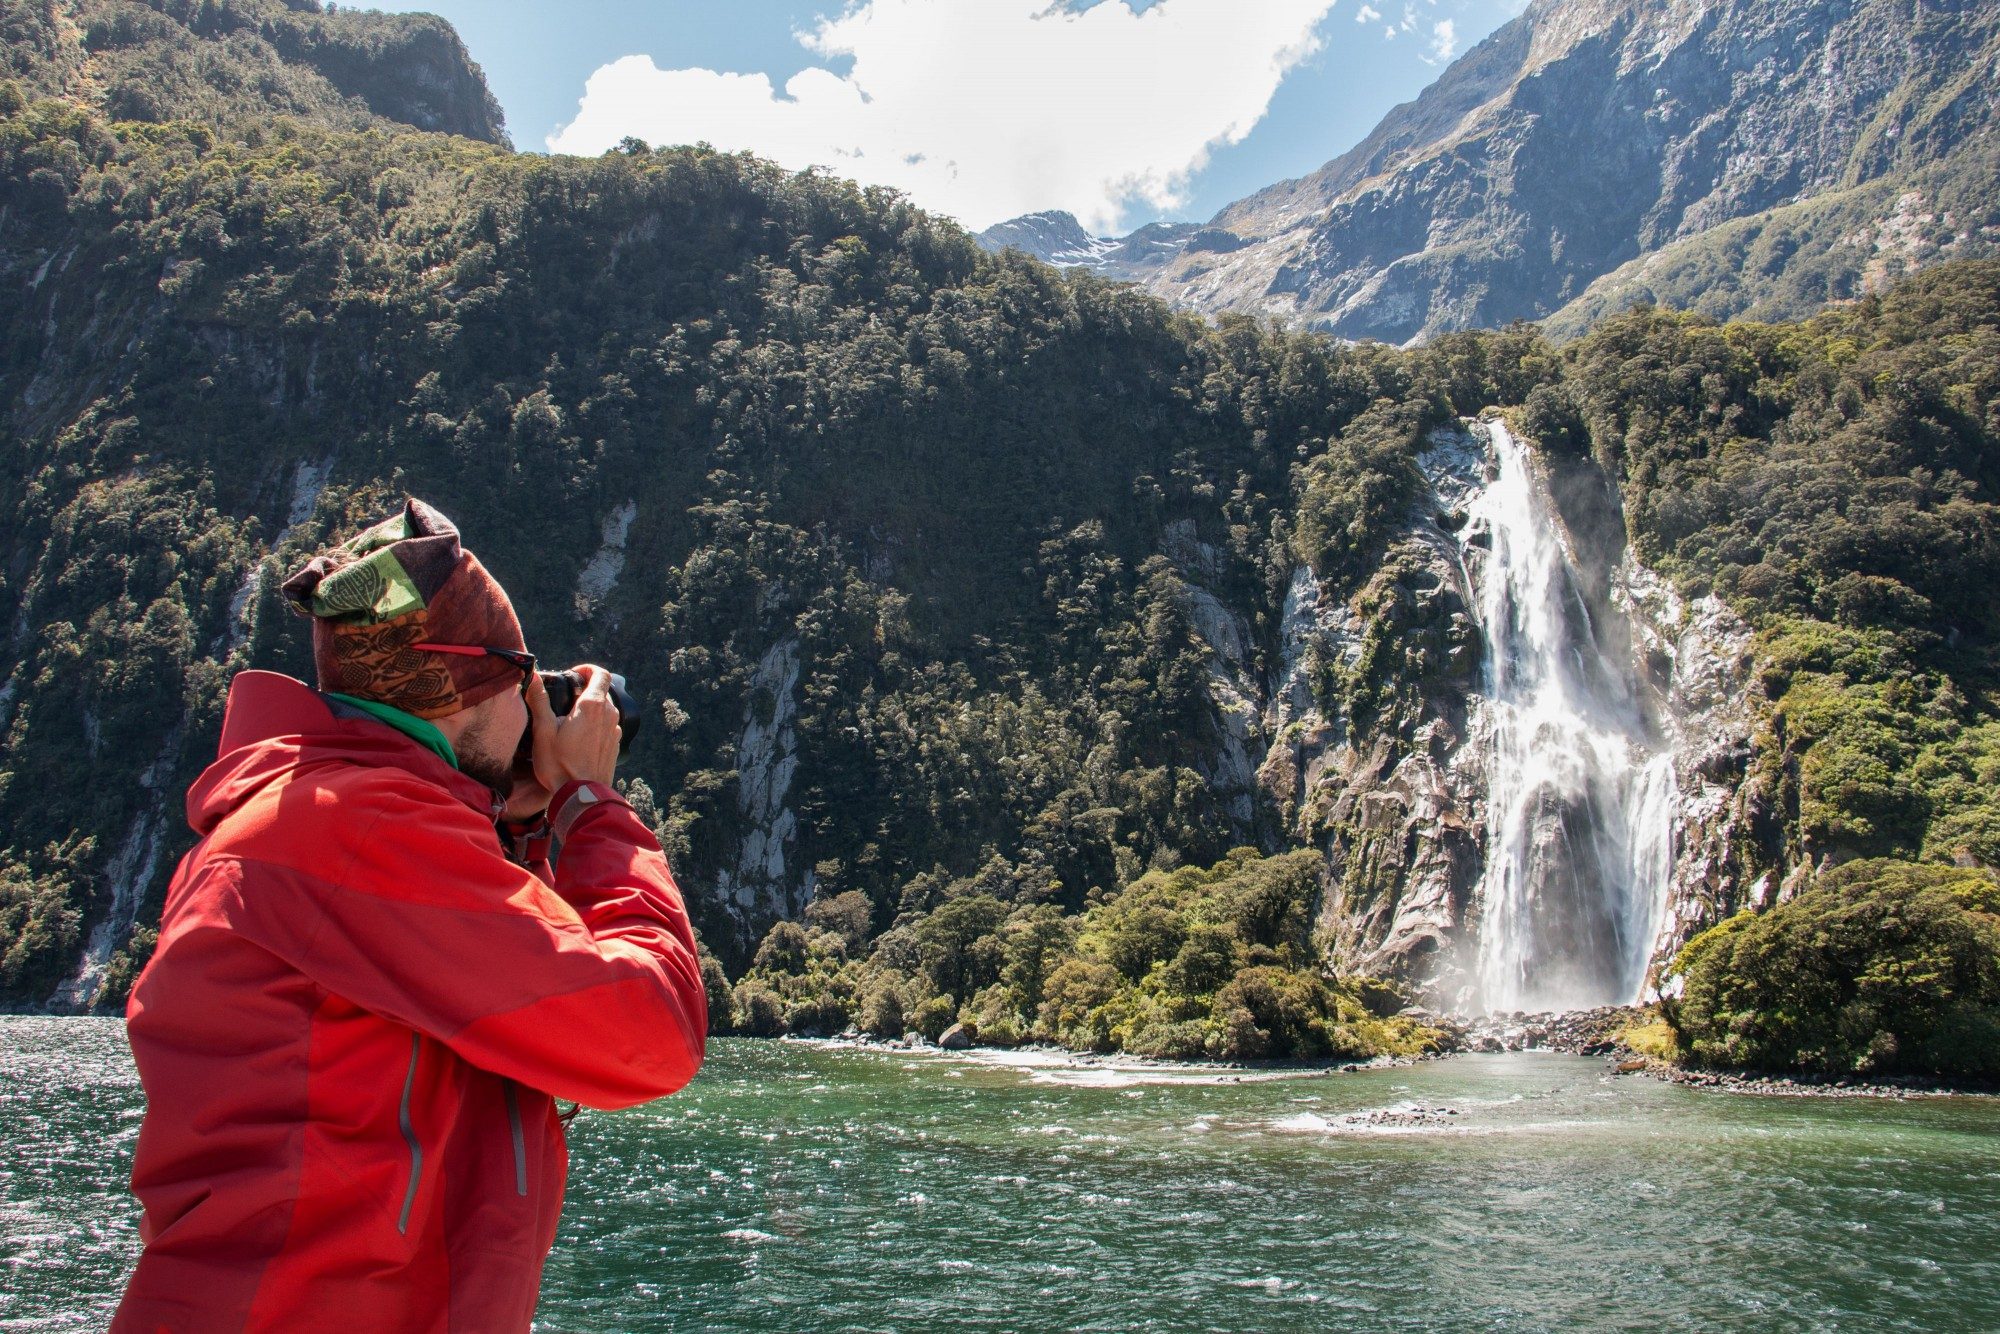 Lady Bowen Falls waterfall at Milford Sound being photographed by a man in a red coat